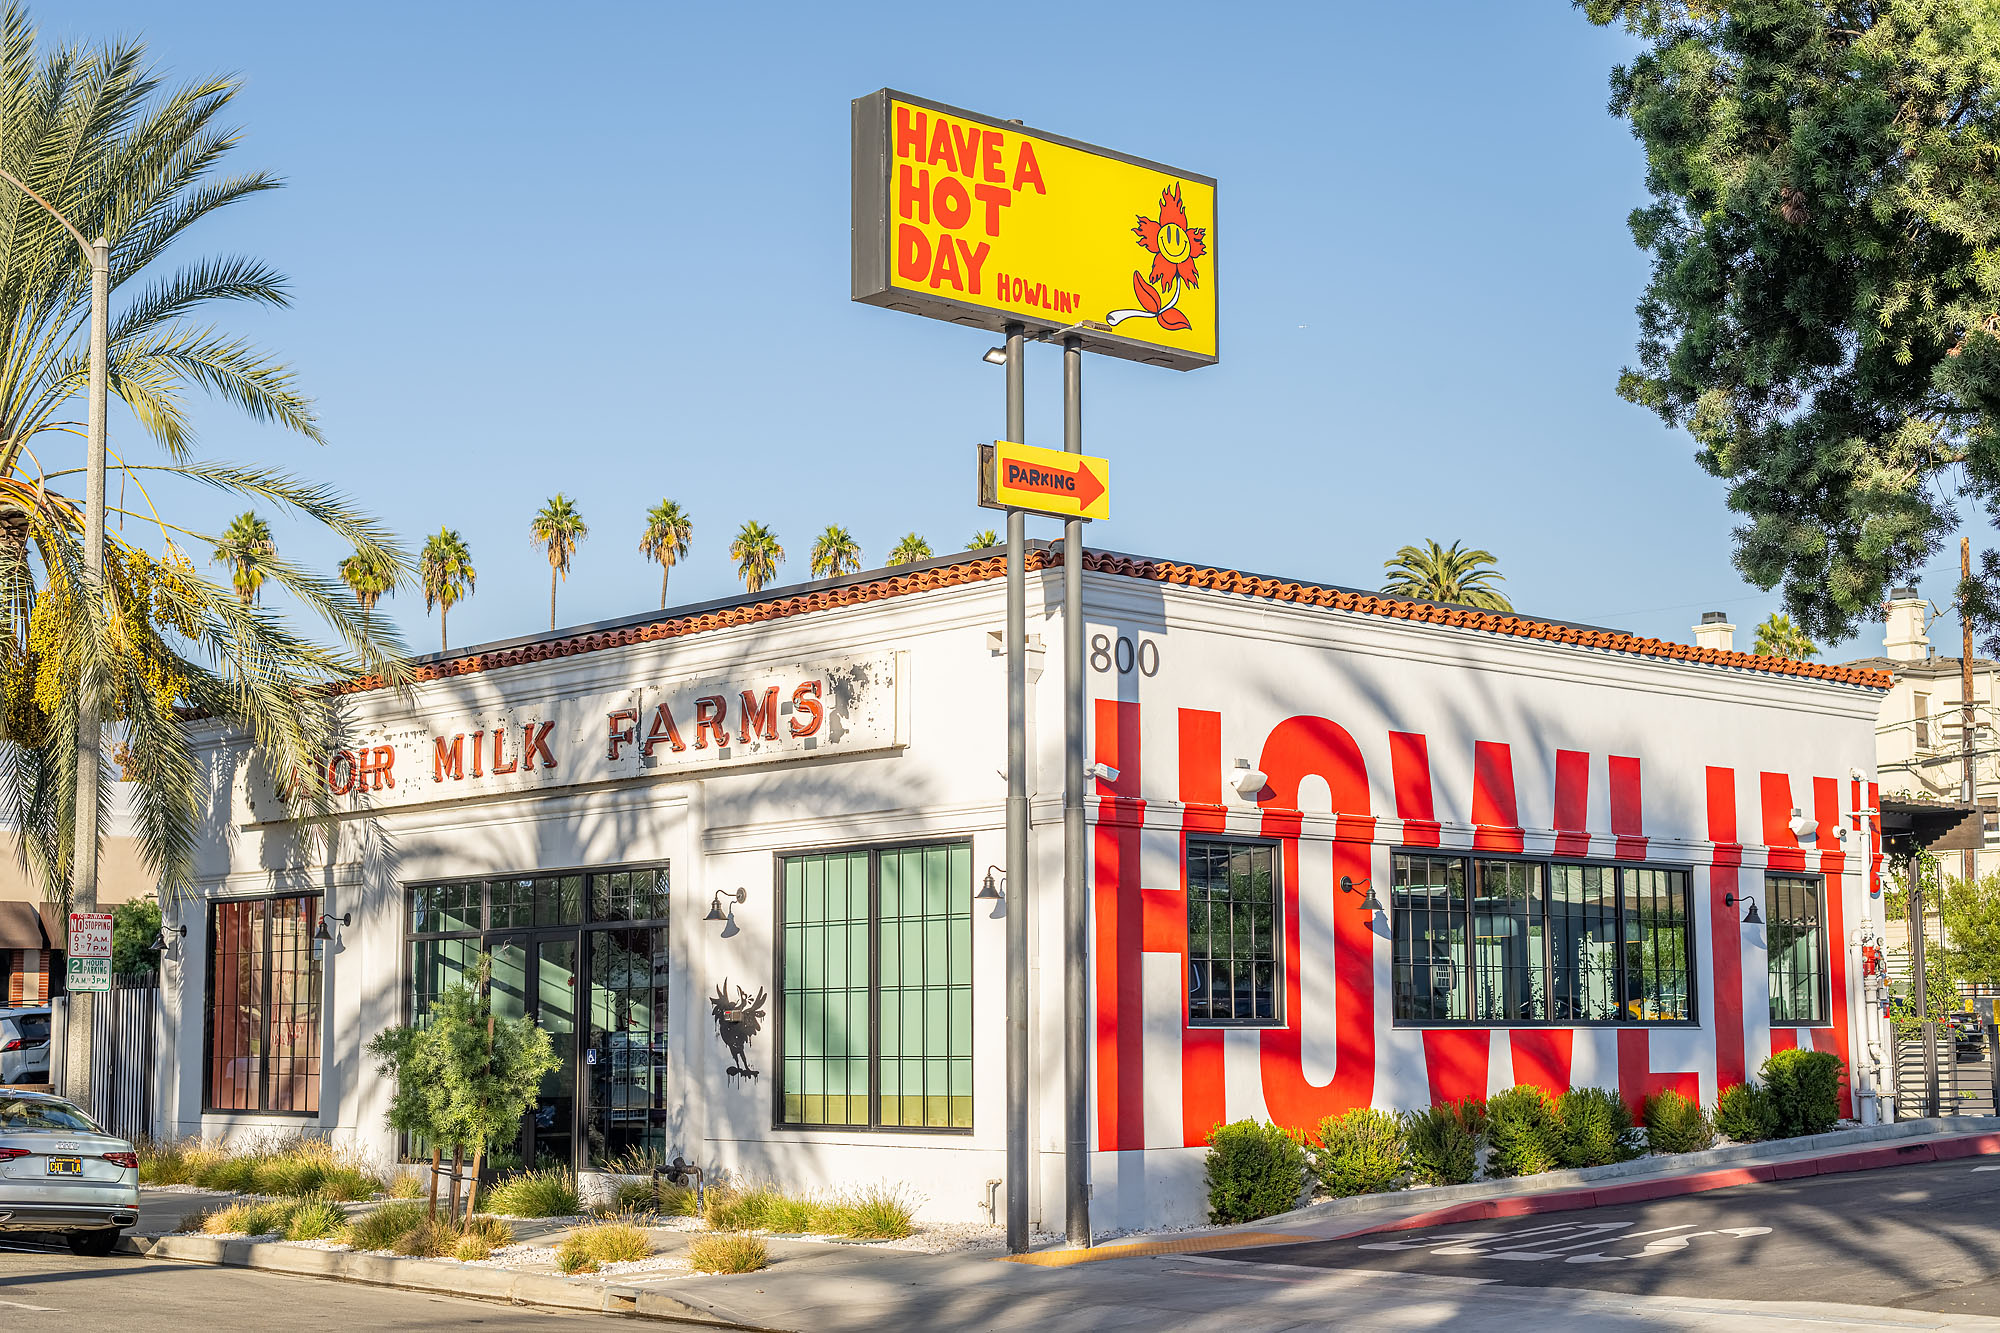 A white and red building that houses Howlin’ Ray’s restaurant in Pasadena, California.